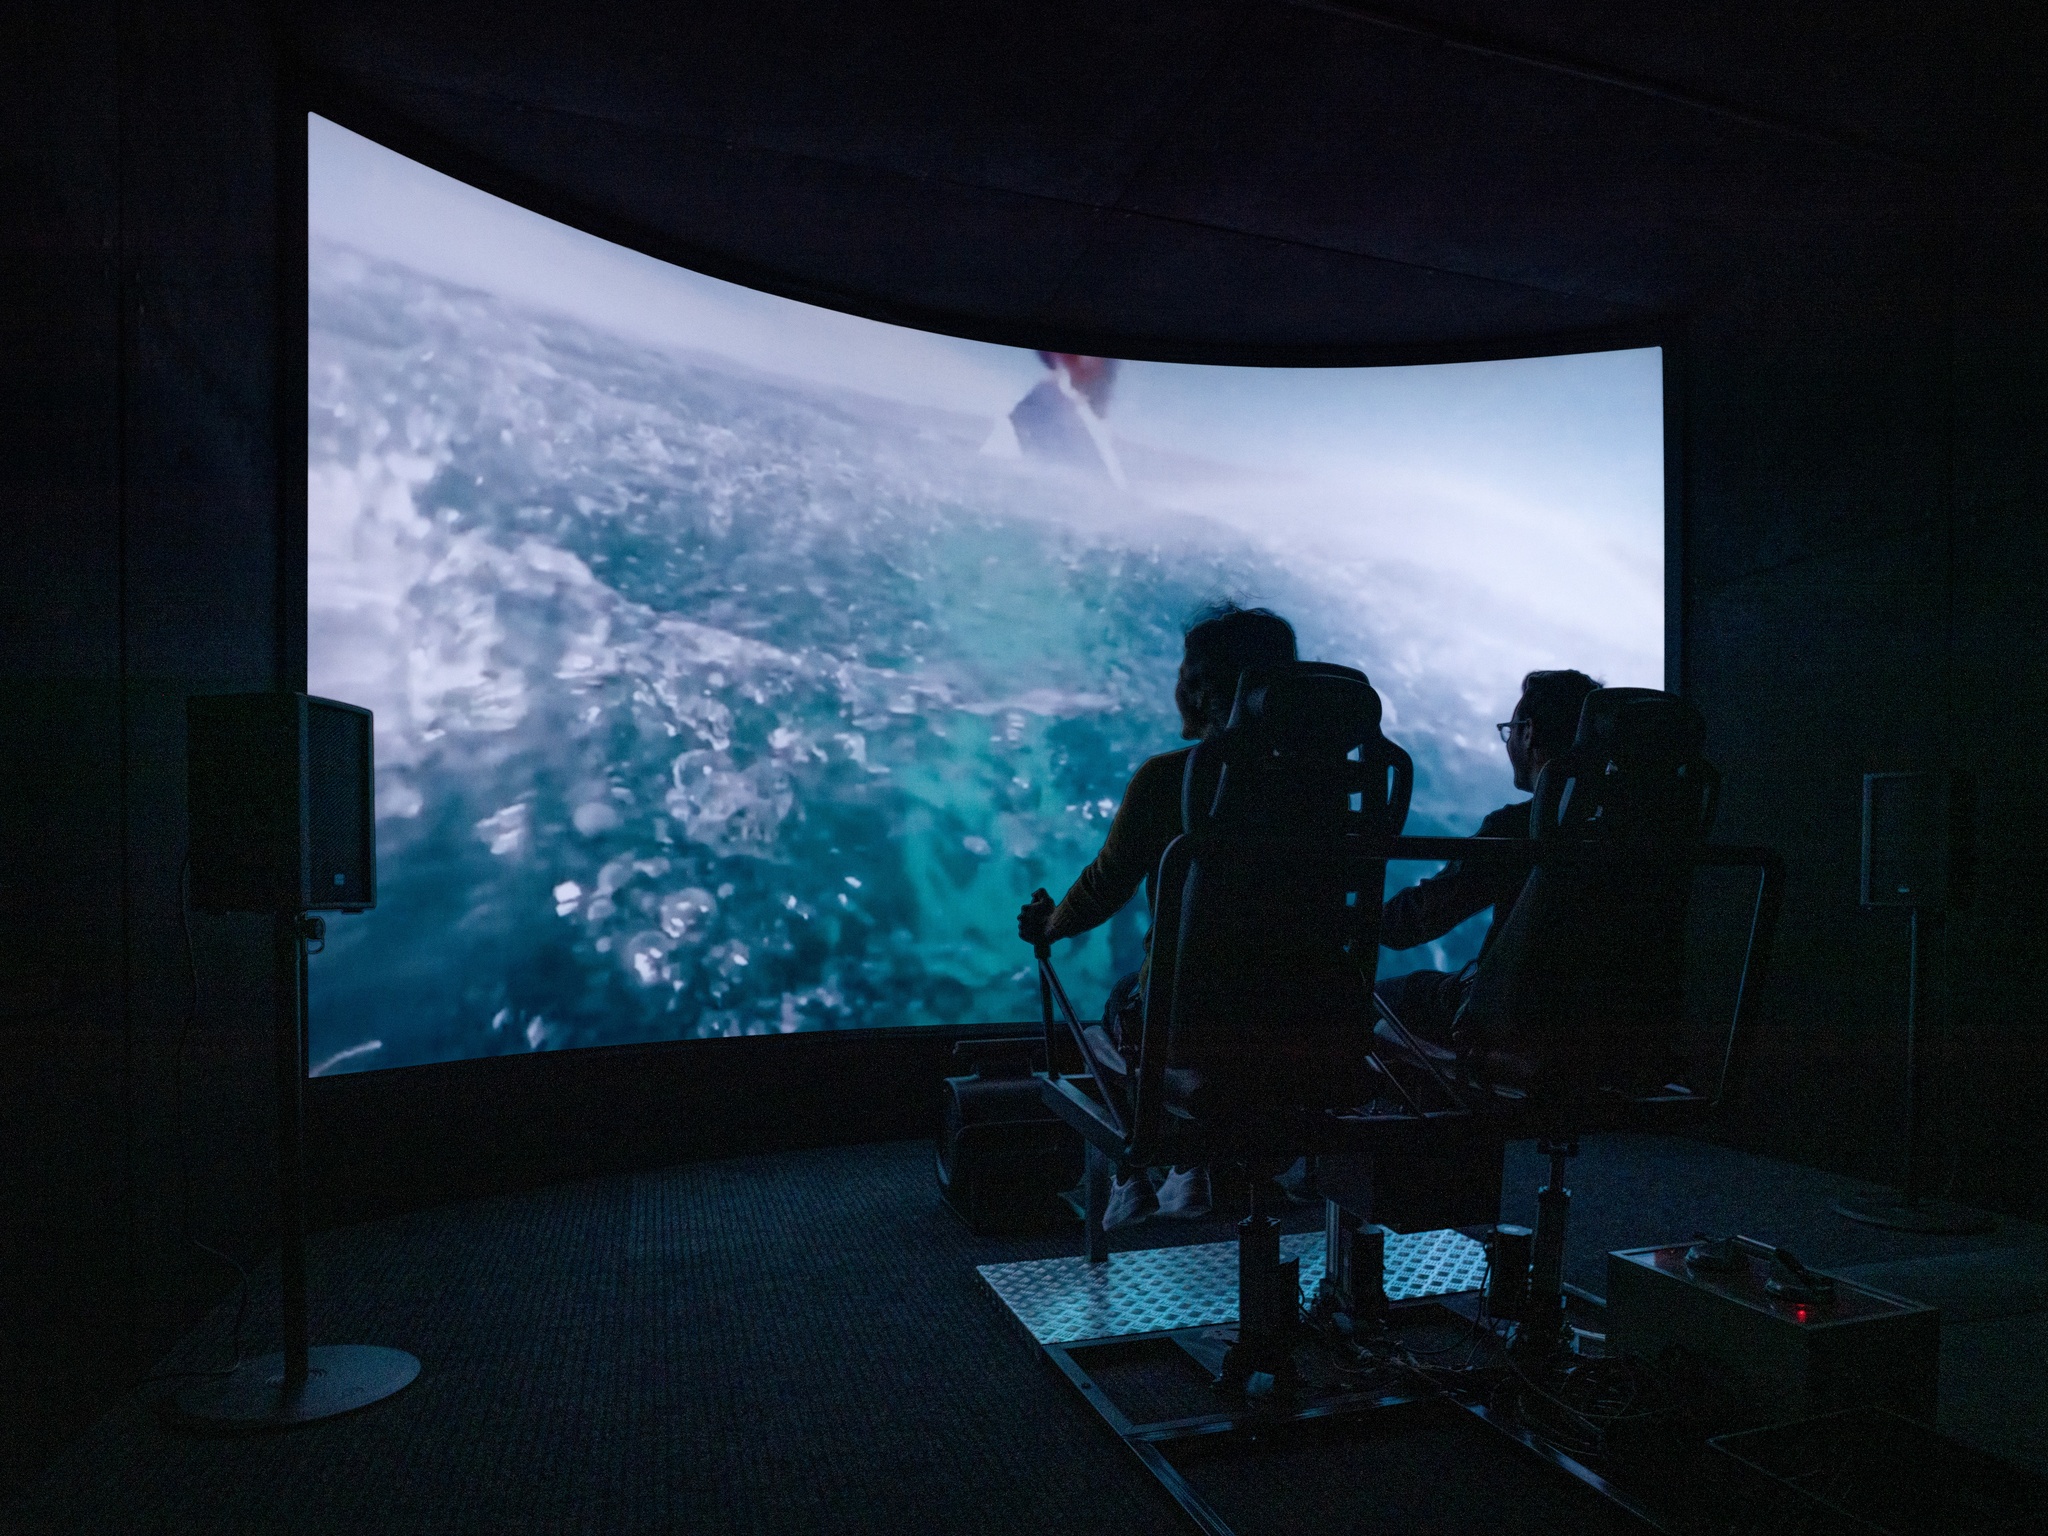 Twp people seated in a flight simulator in front of a large screen showing close-up video of ocean water